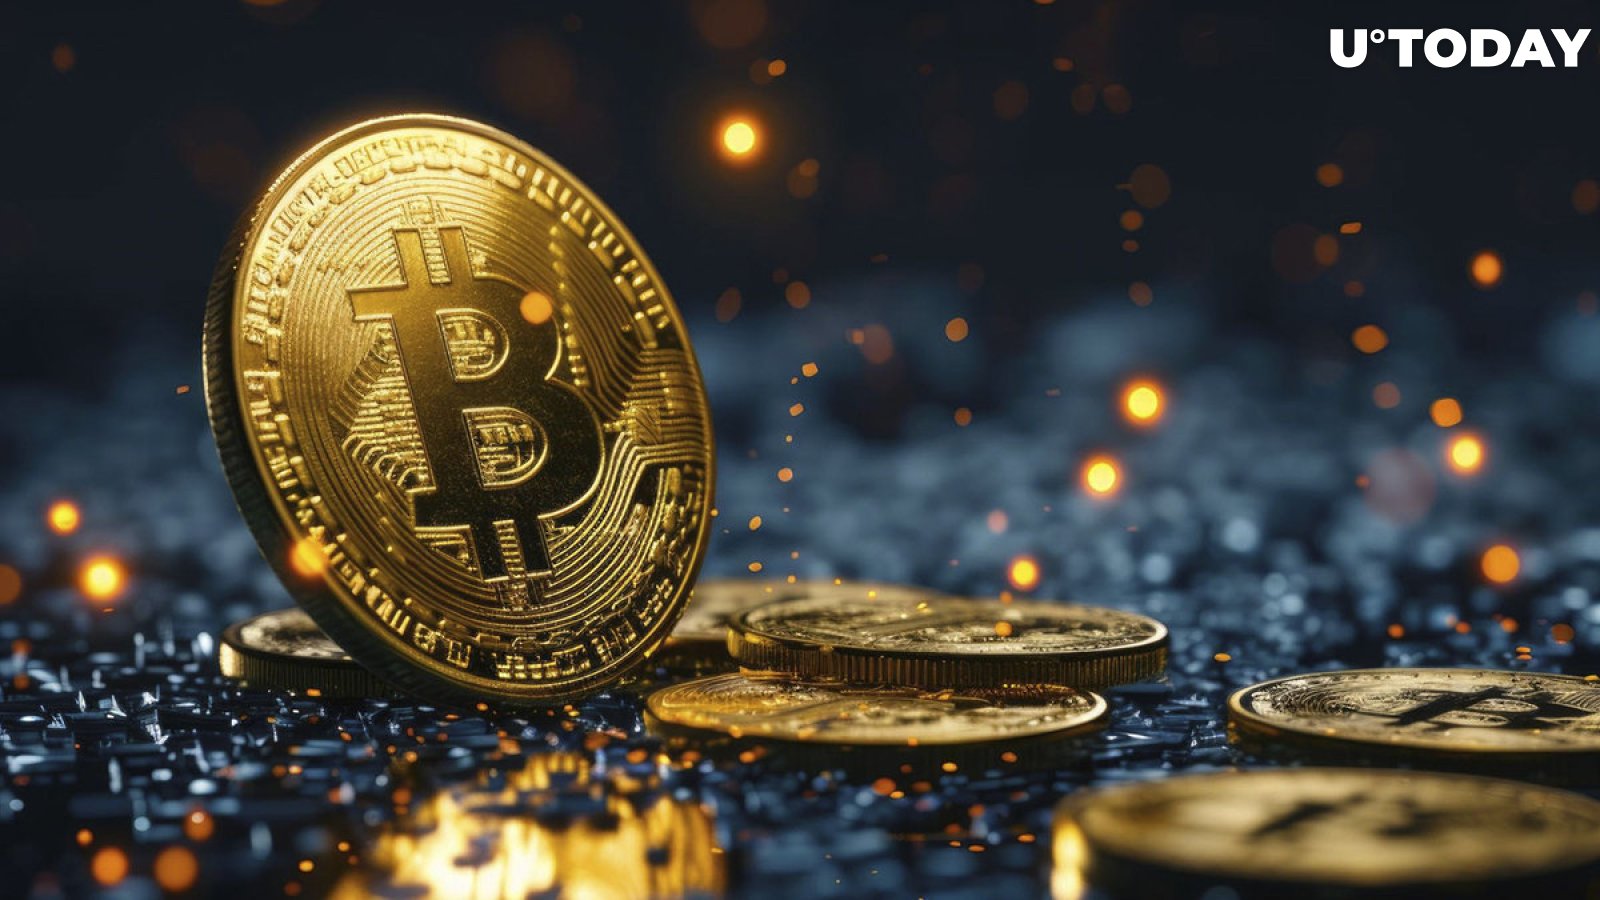 Bitcoin (BTC) Could Be on Verge of Surprising Comeback